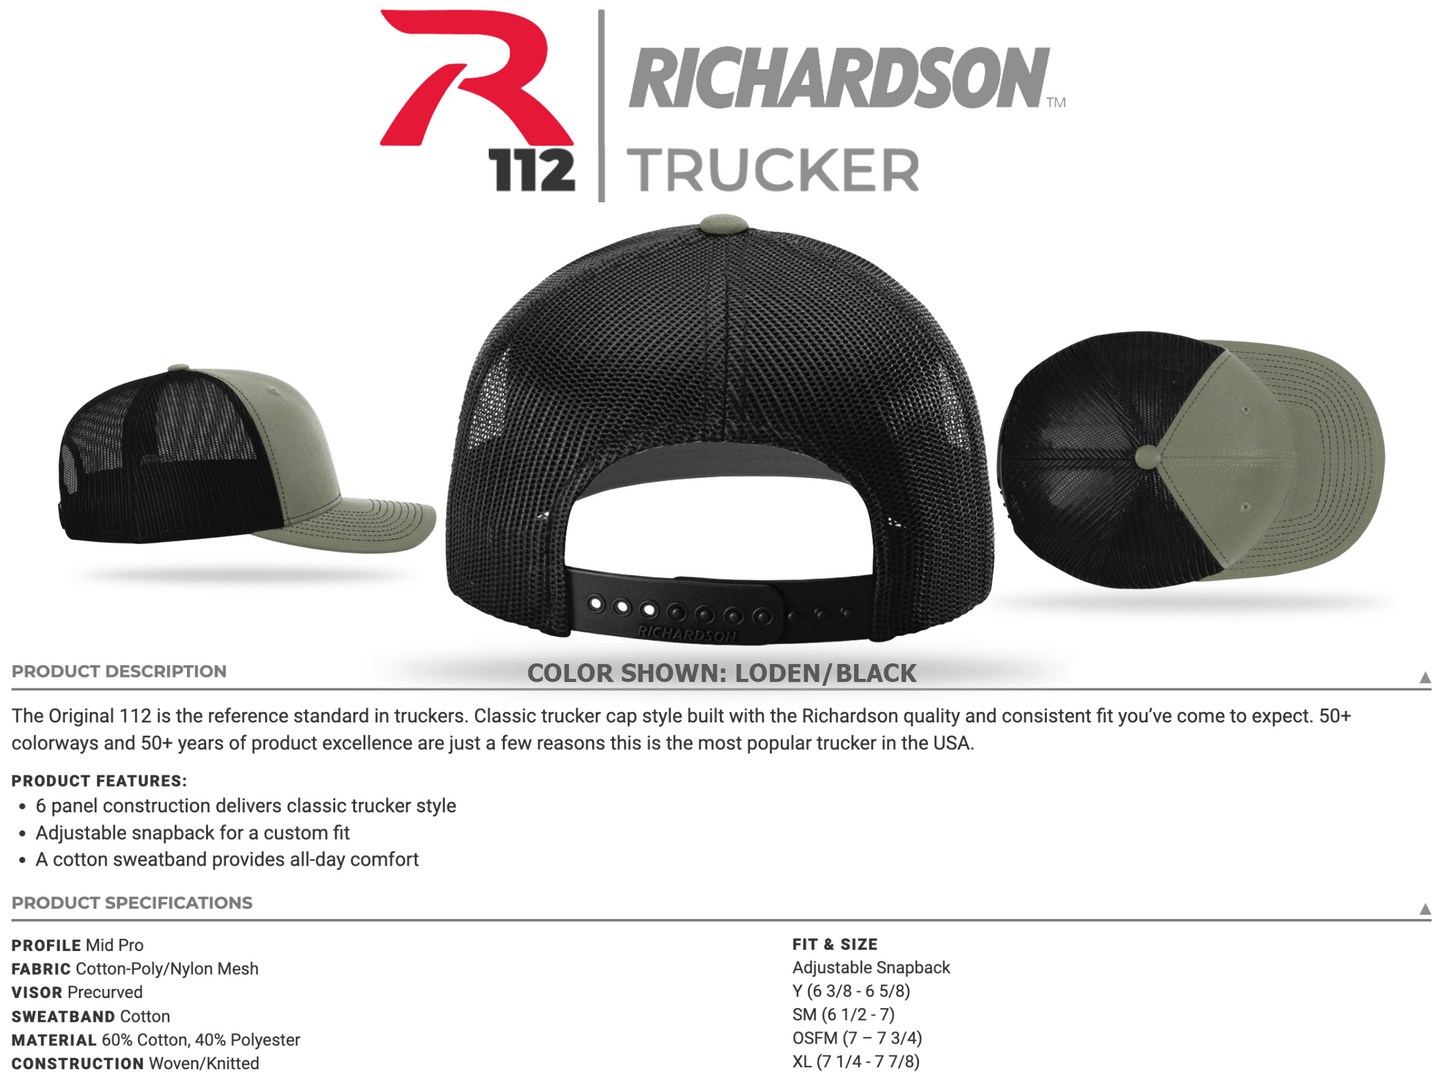 Fishing Boat Richardson 112 Trucker Mesh Back Hat Charcoal/White / Mid-Profile R112 - One Size Fits Most